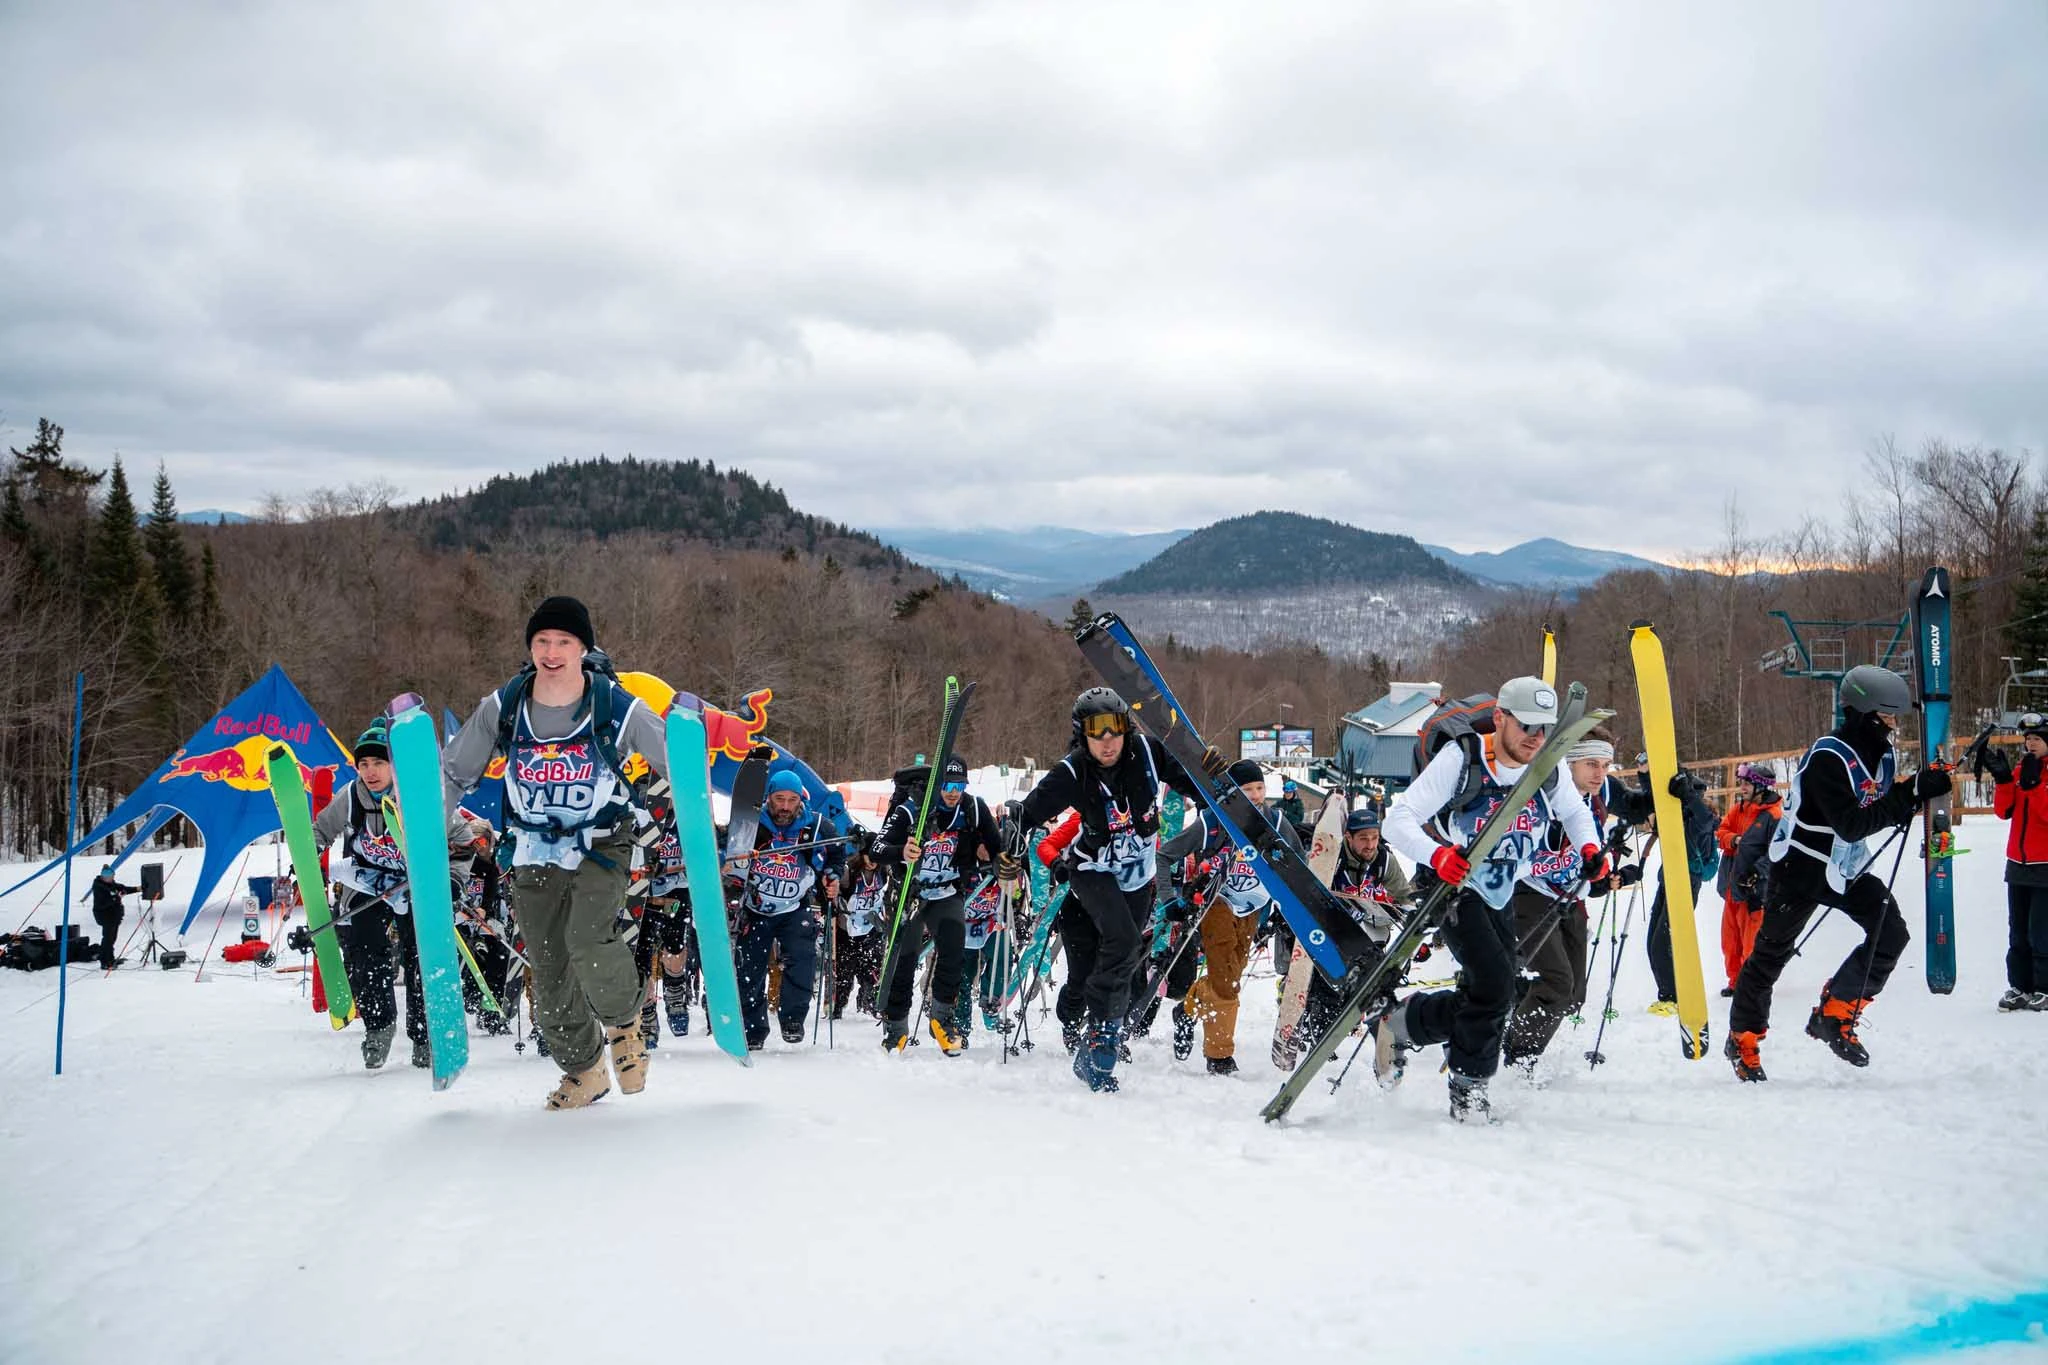 a Red Bull race start with dozens of skiers, skis with skins on in hand, running uphill